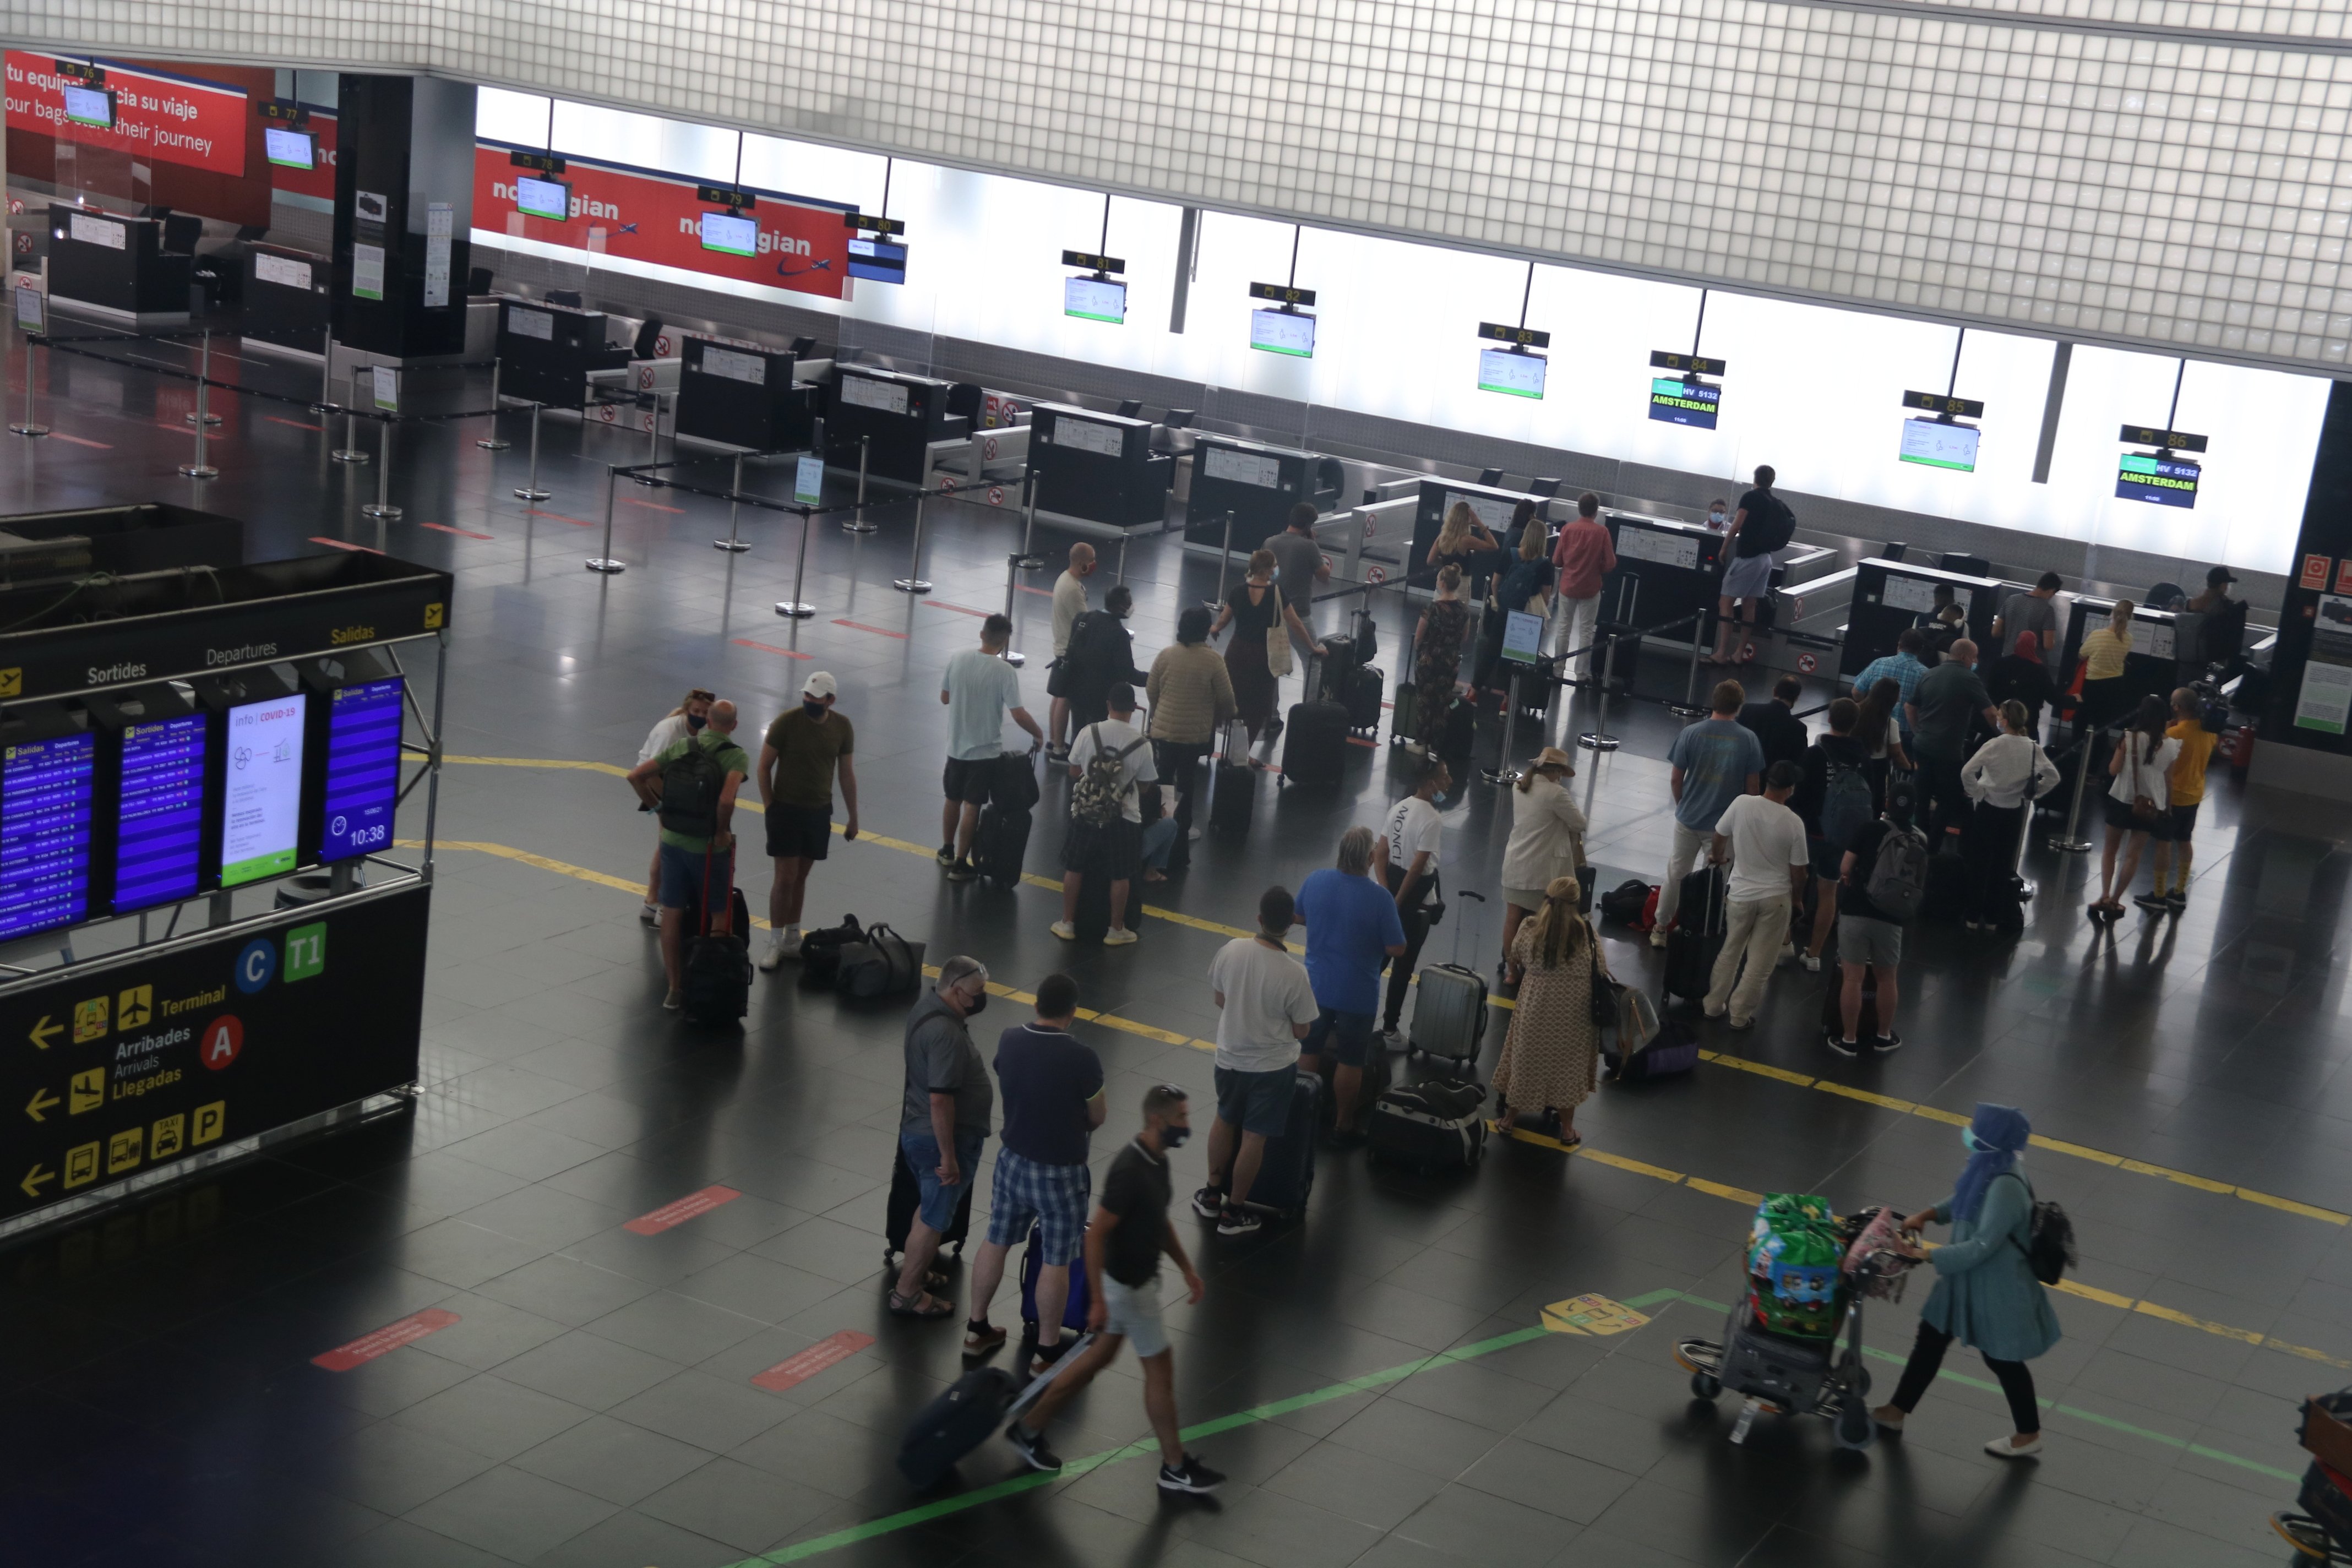 New case of 'migration via airport stopover': this time, asylum seekers in Barcelona